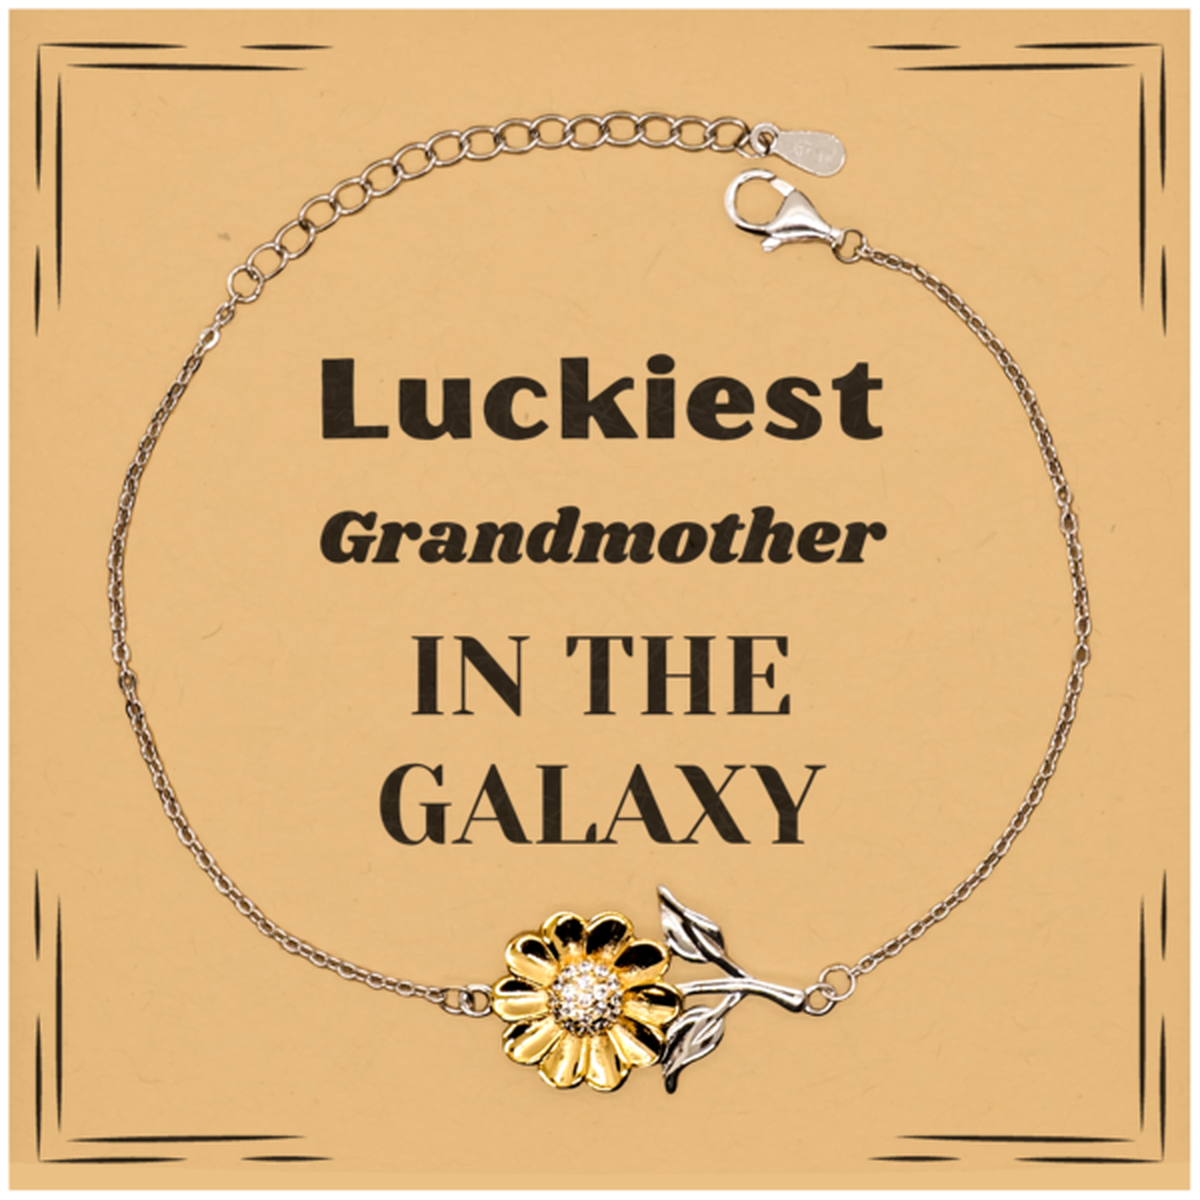 Luckiest Grandmother in the Galaxy, To My Grandmother Message Card Gifts, Christmas Grandmother Sunflower Bracelet Gifts, X-mas Birthday Unique Gifts For Grandmother Men Women